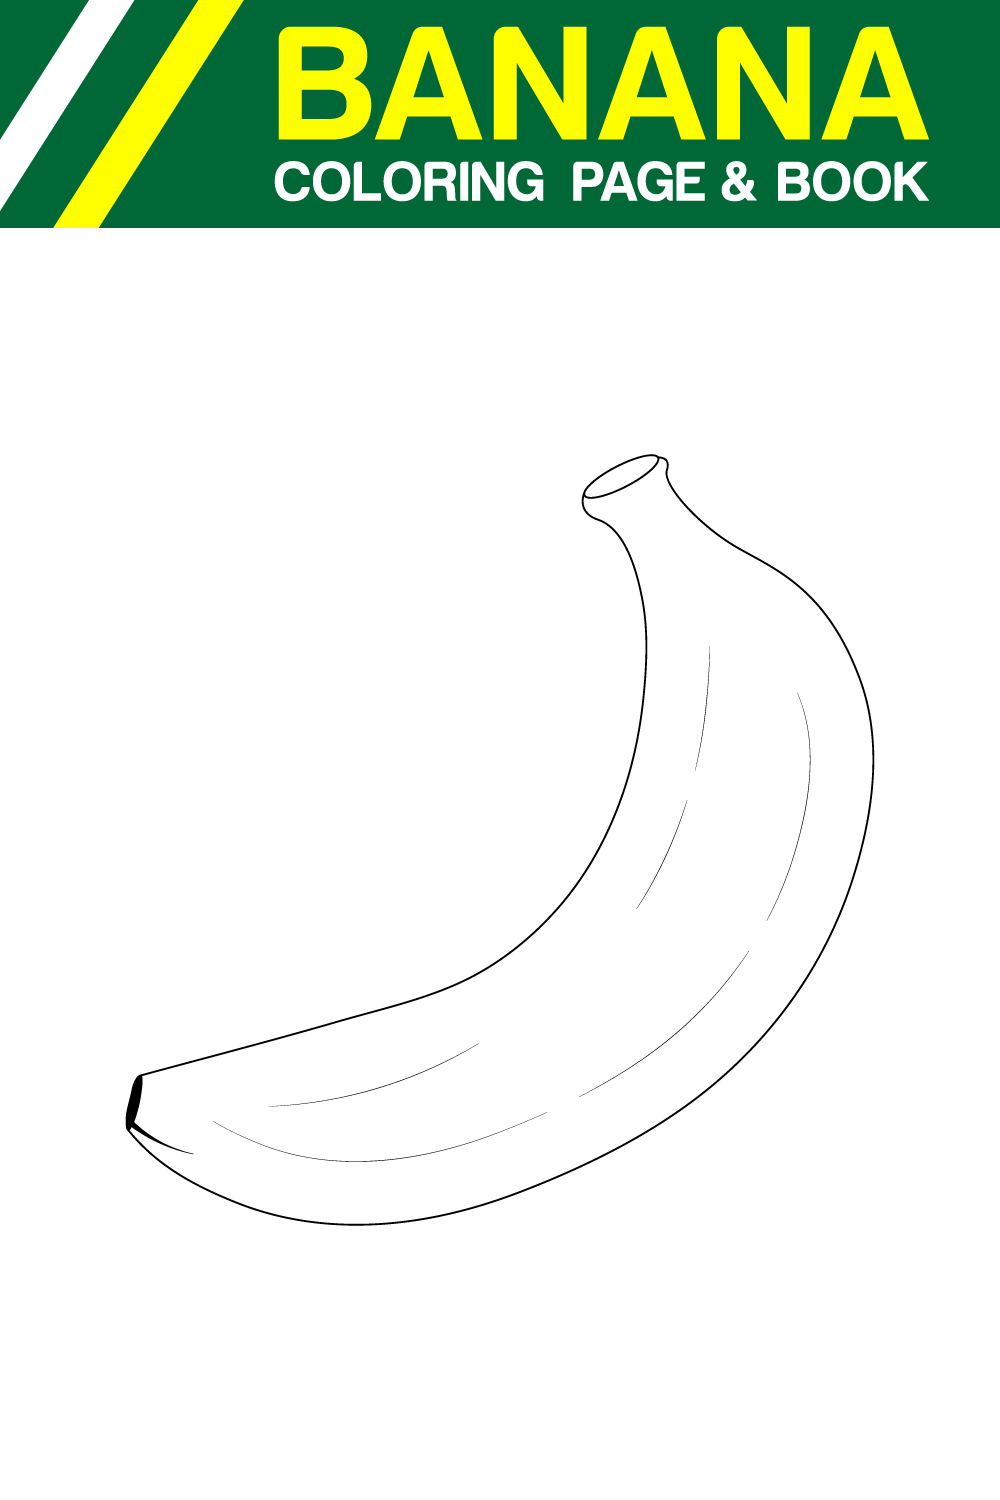 Fruit Coloring Page Banana hand Drawn Line Art pinterest preview image.